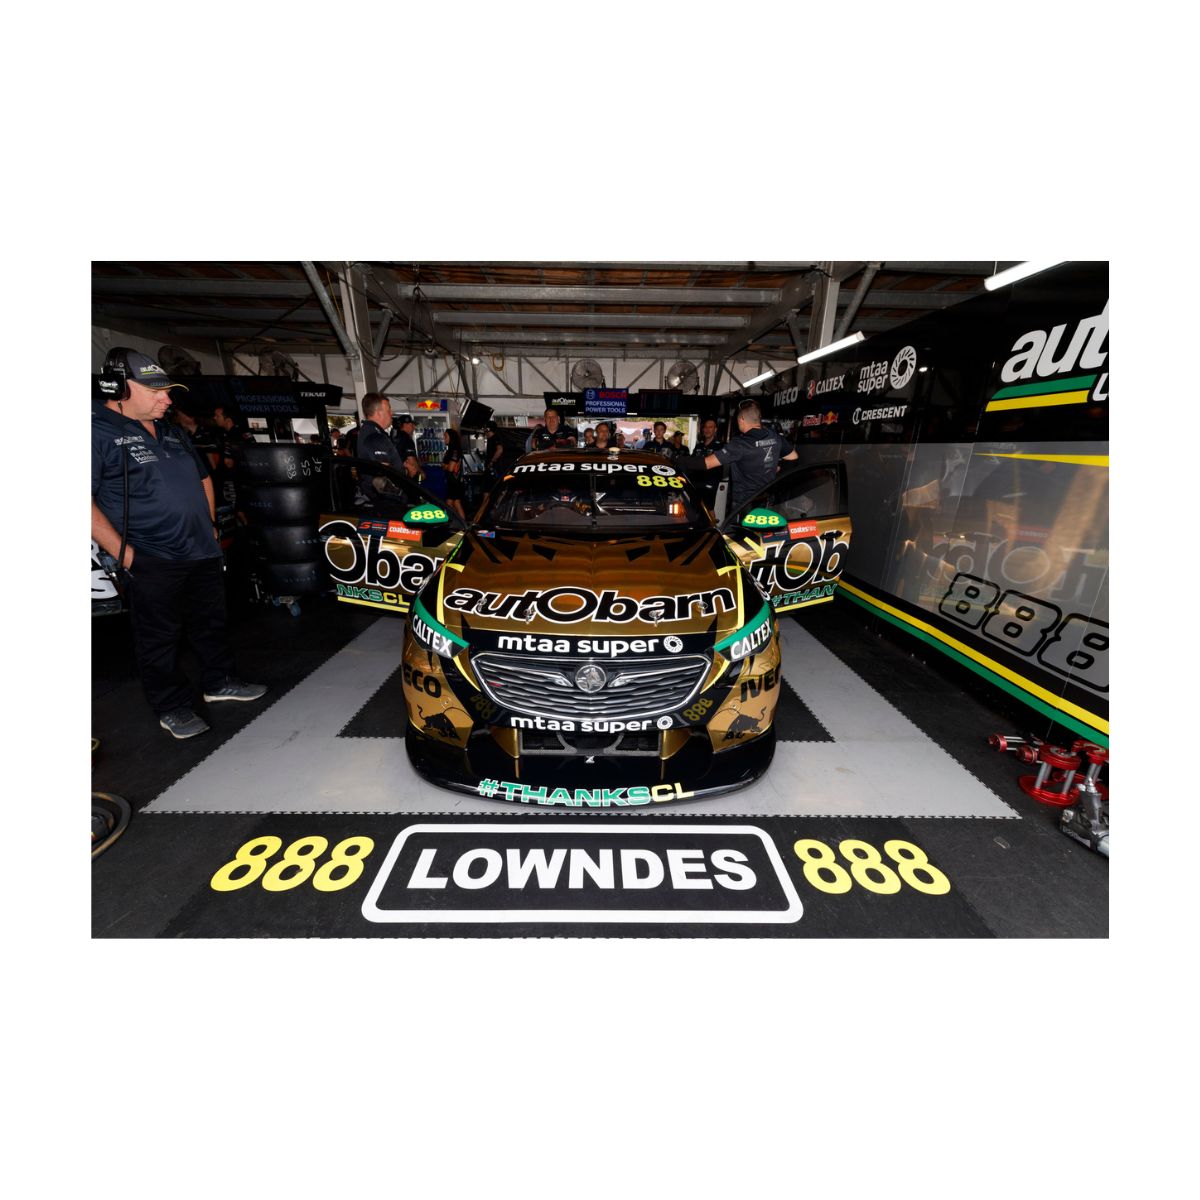 Holden ZB Commodore Autobarn Lowndes Racing #888 - Lowndes - 2018 Newcastle 500  "Lowndes Final Race"